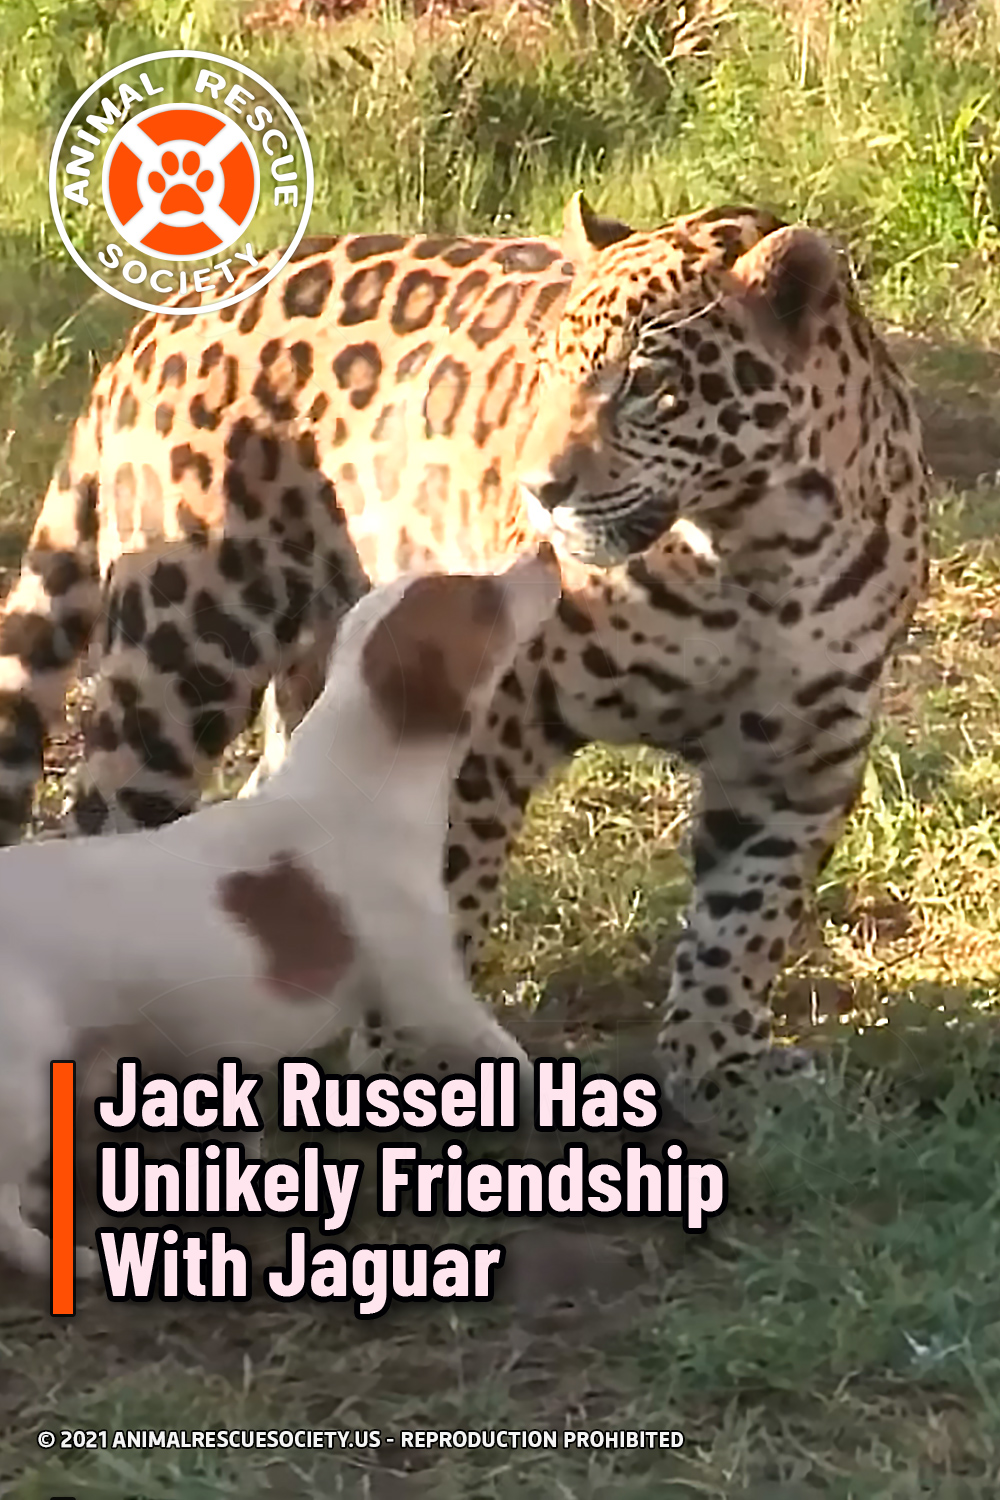 Jack Russell Has Unlikely Friendship With Jaguar